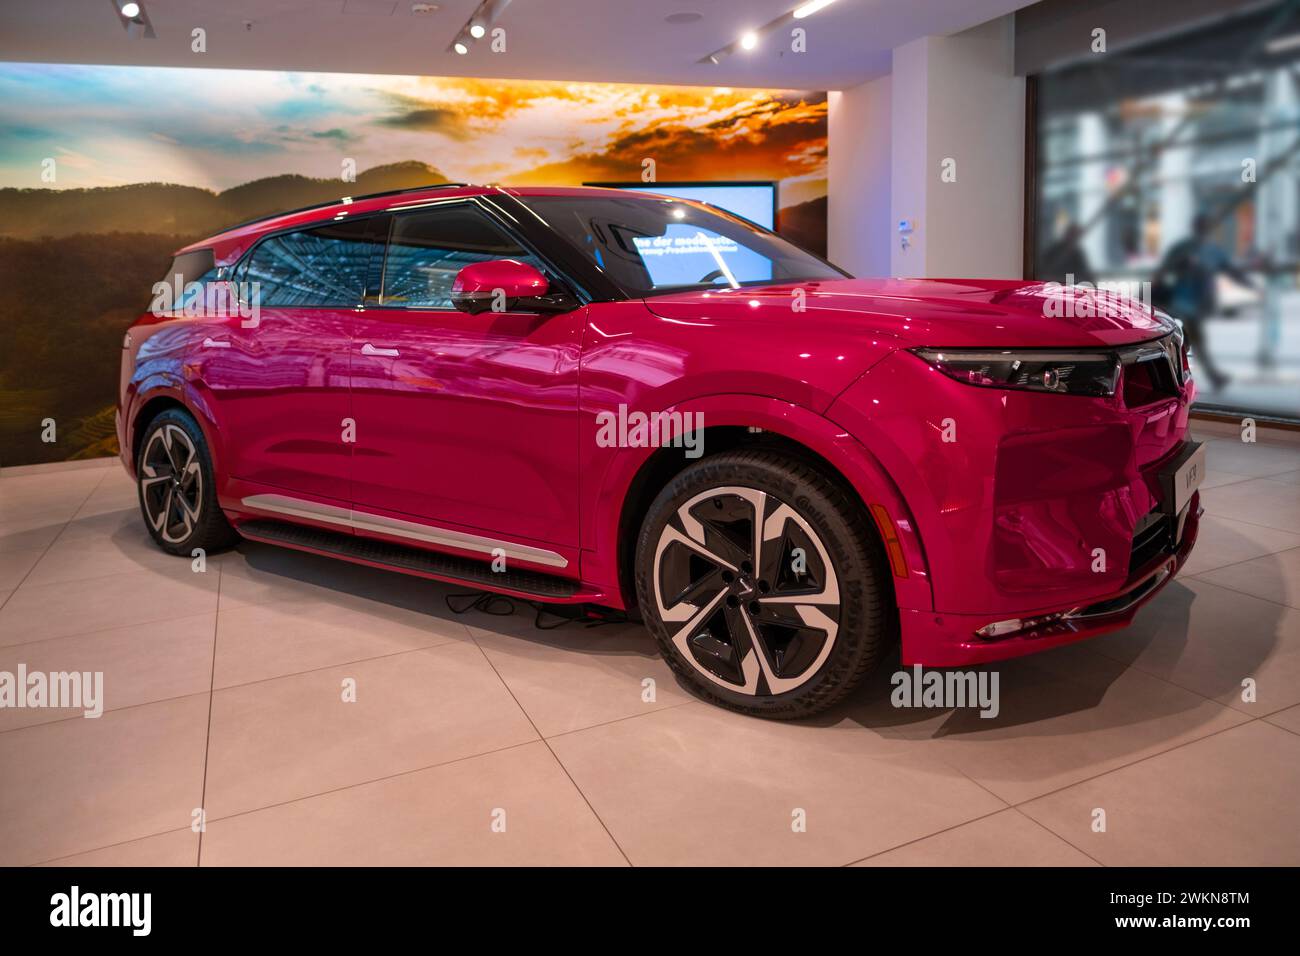 large pink Vinfast vf 9 electric SUV, advanced technologies in vietnamese automotive industry, Environmental sustainability, Car dealerships, test dri Stock Photo